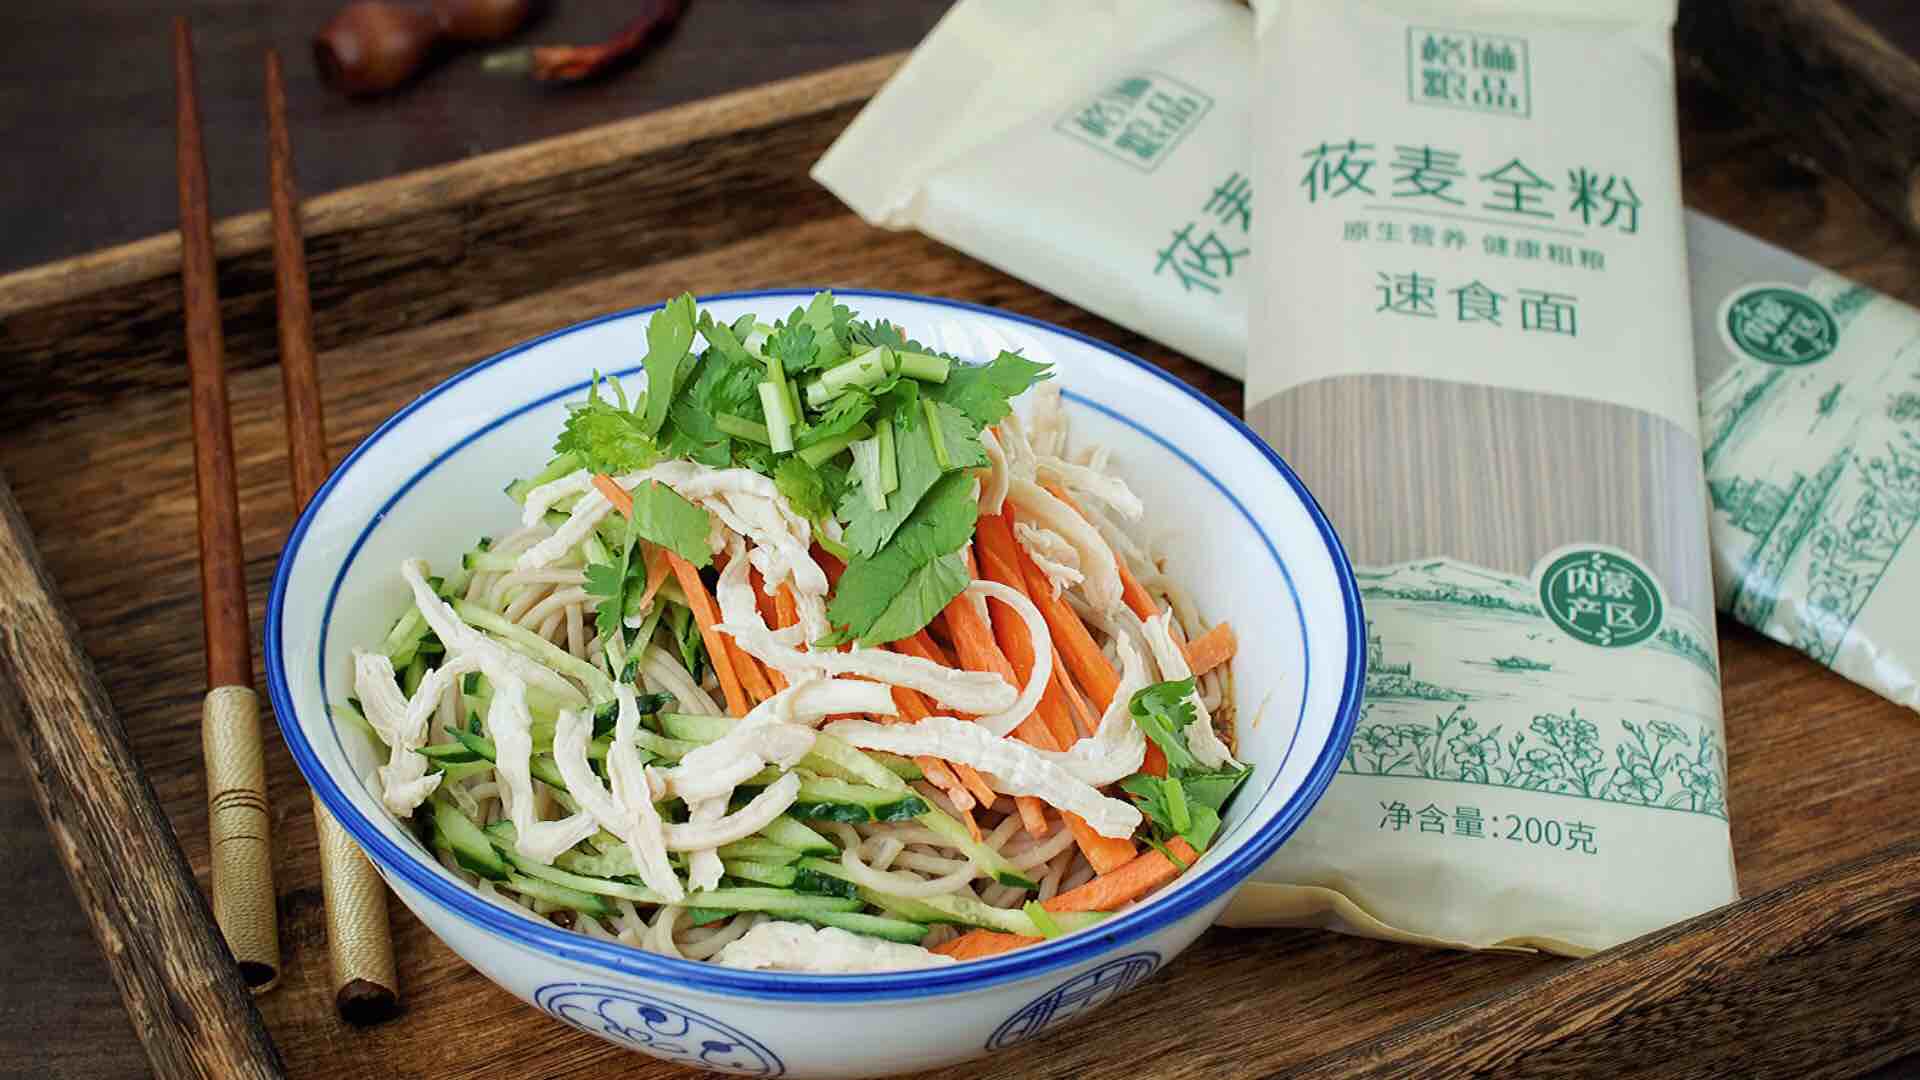 A Bowl of Noodles that are Delicious and Not Fat, It is Too Fragrant to Mix without Cooking! recipe